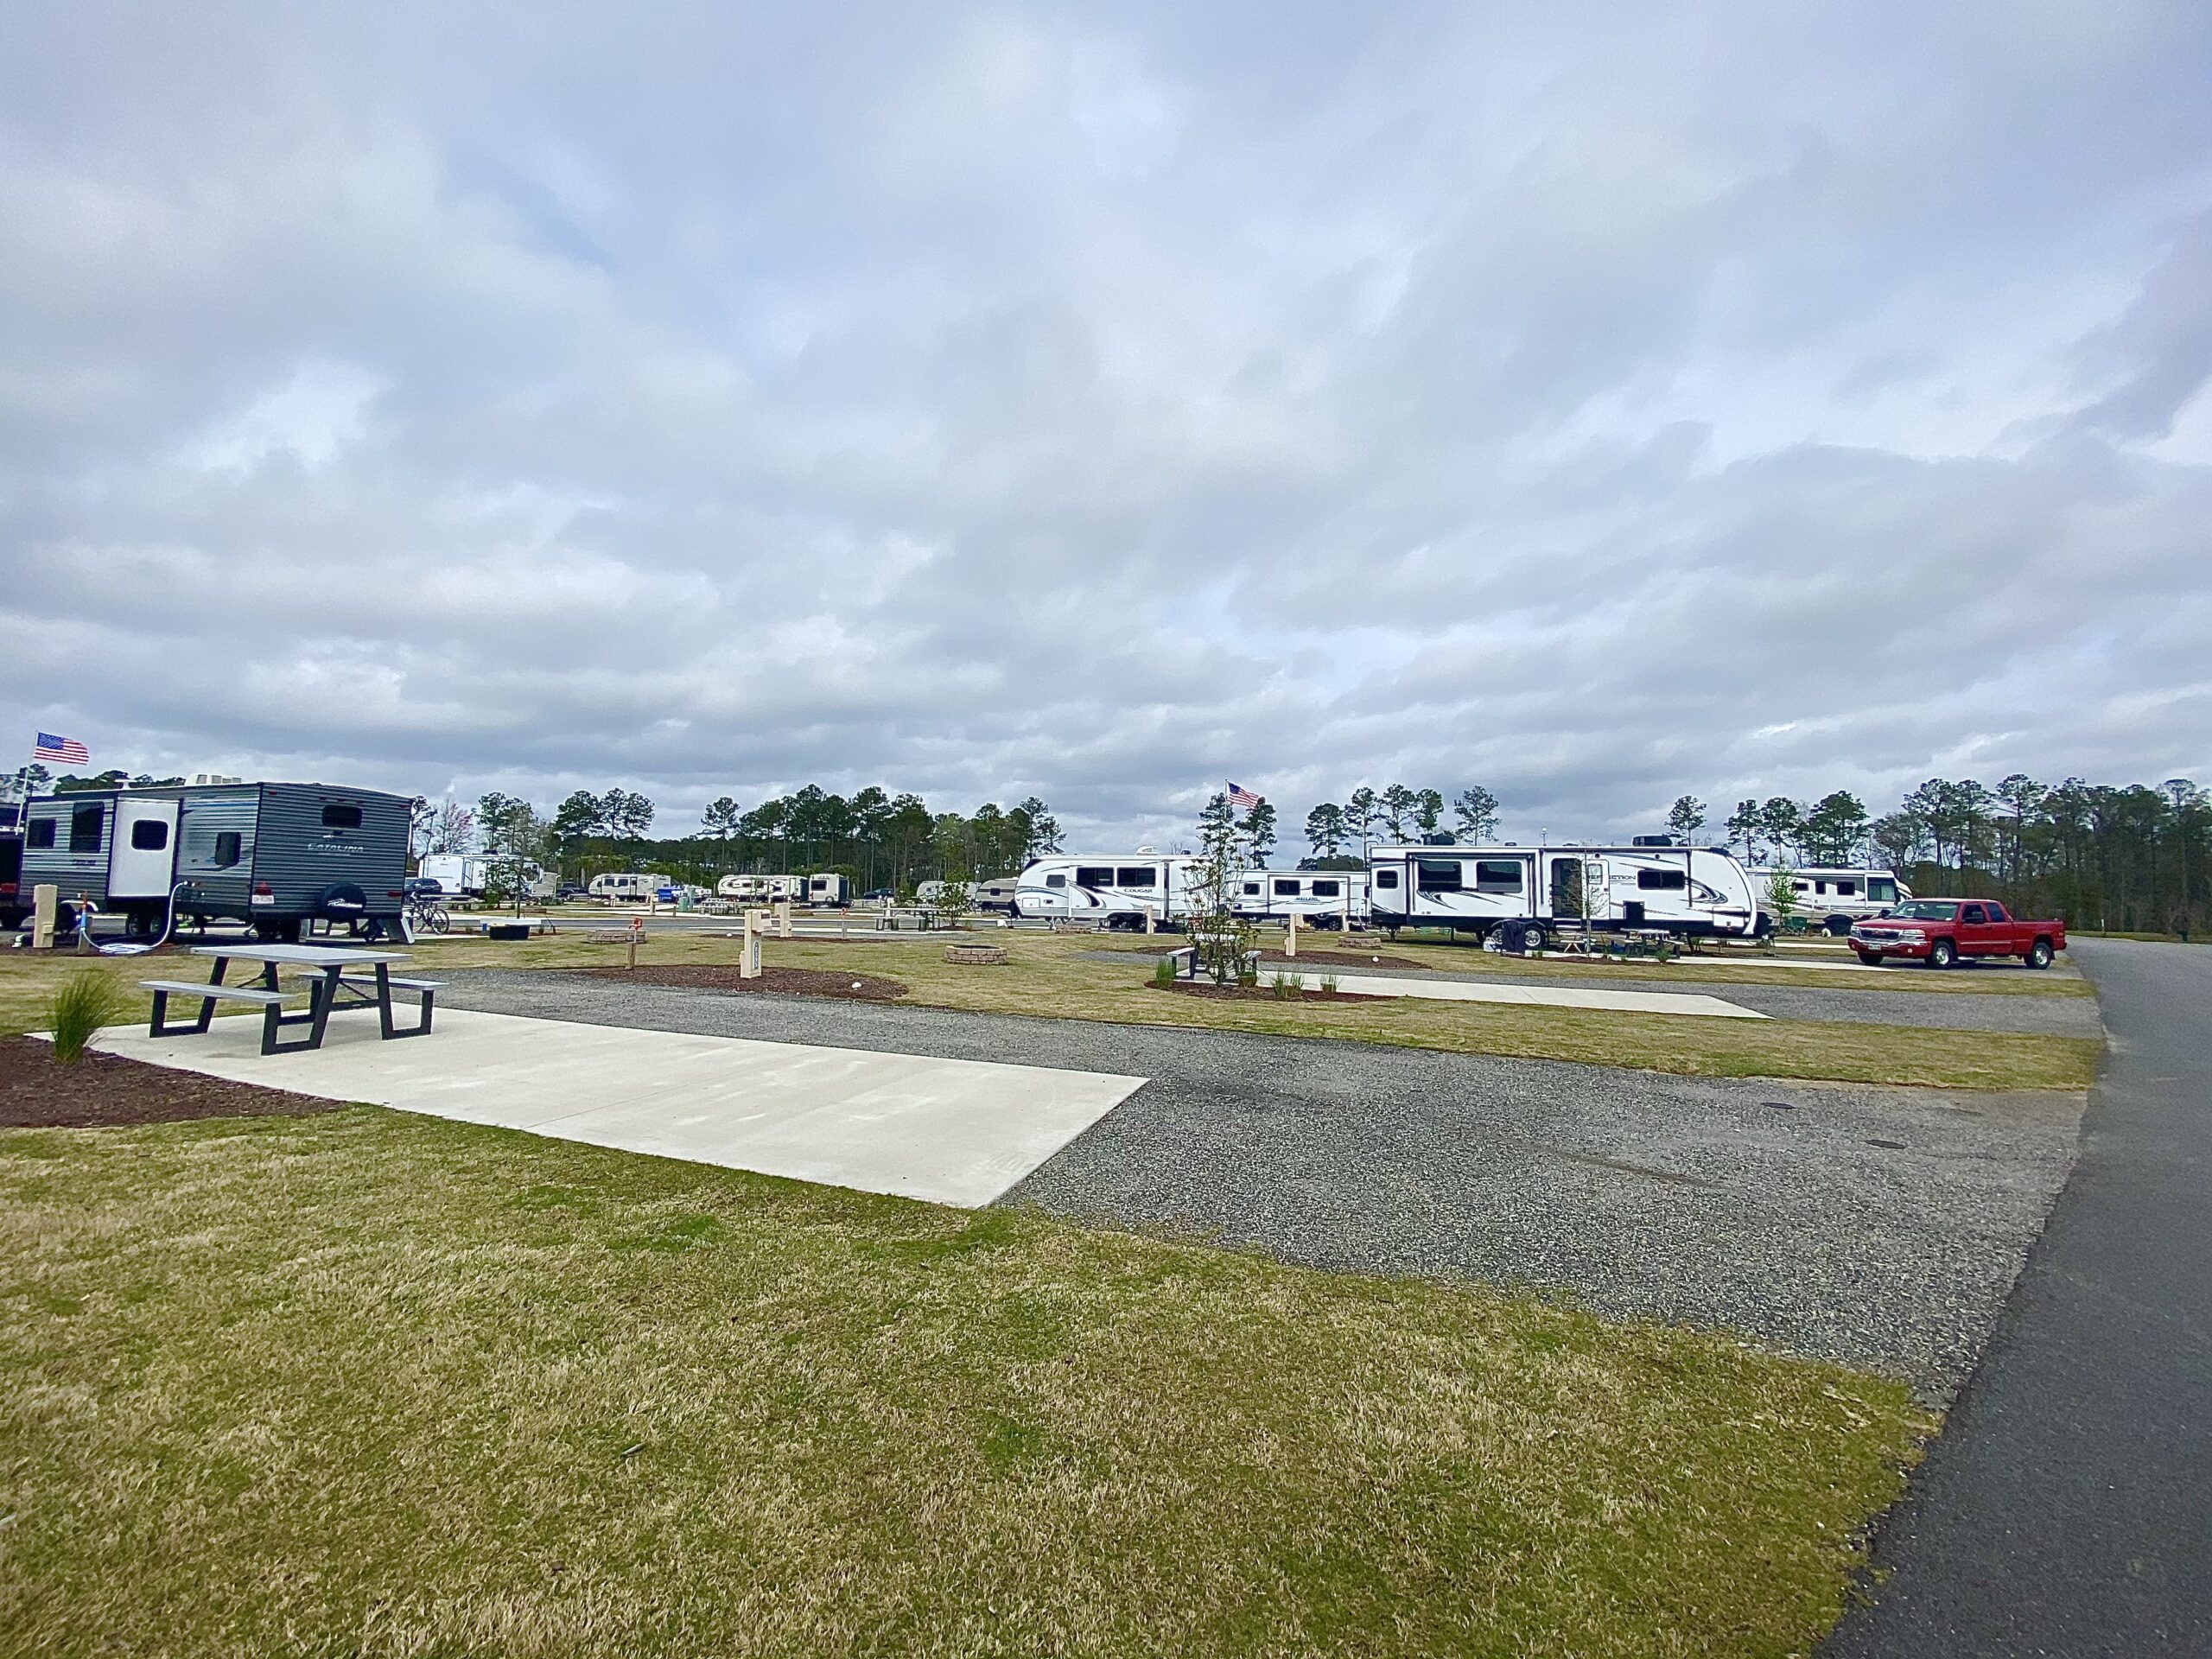 What Makes an RV Resort a Resort? Our Visit to Carolina Pines - The RV